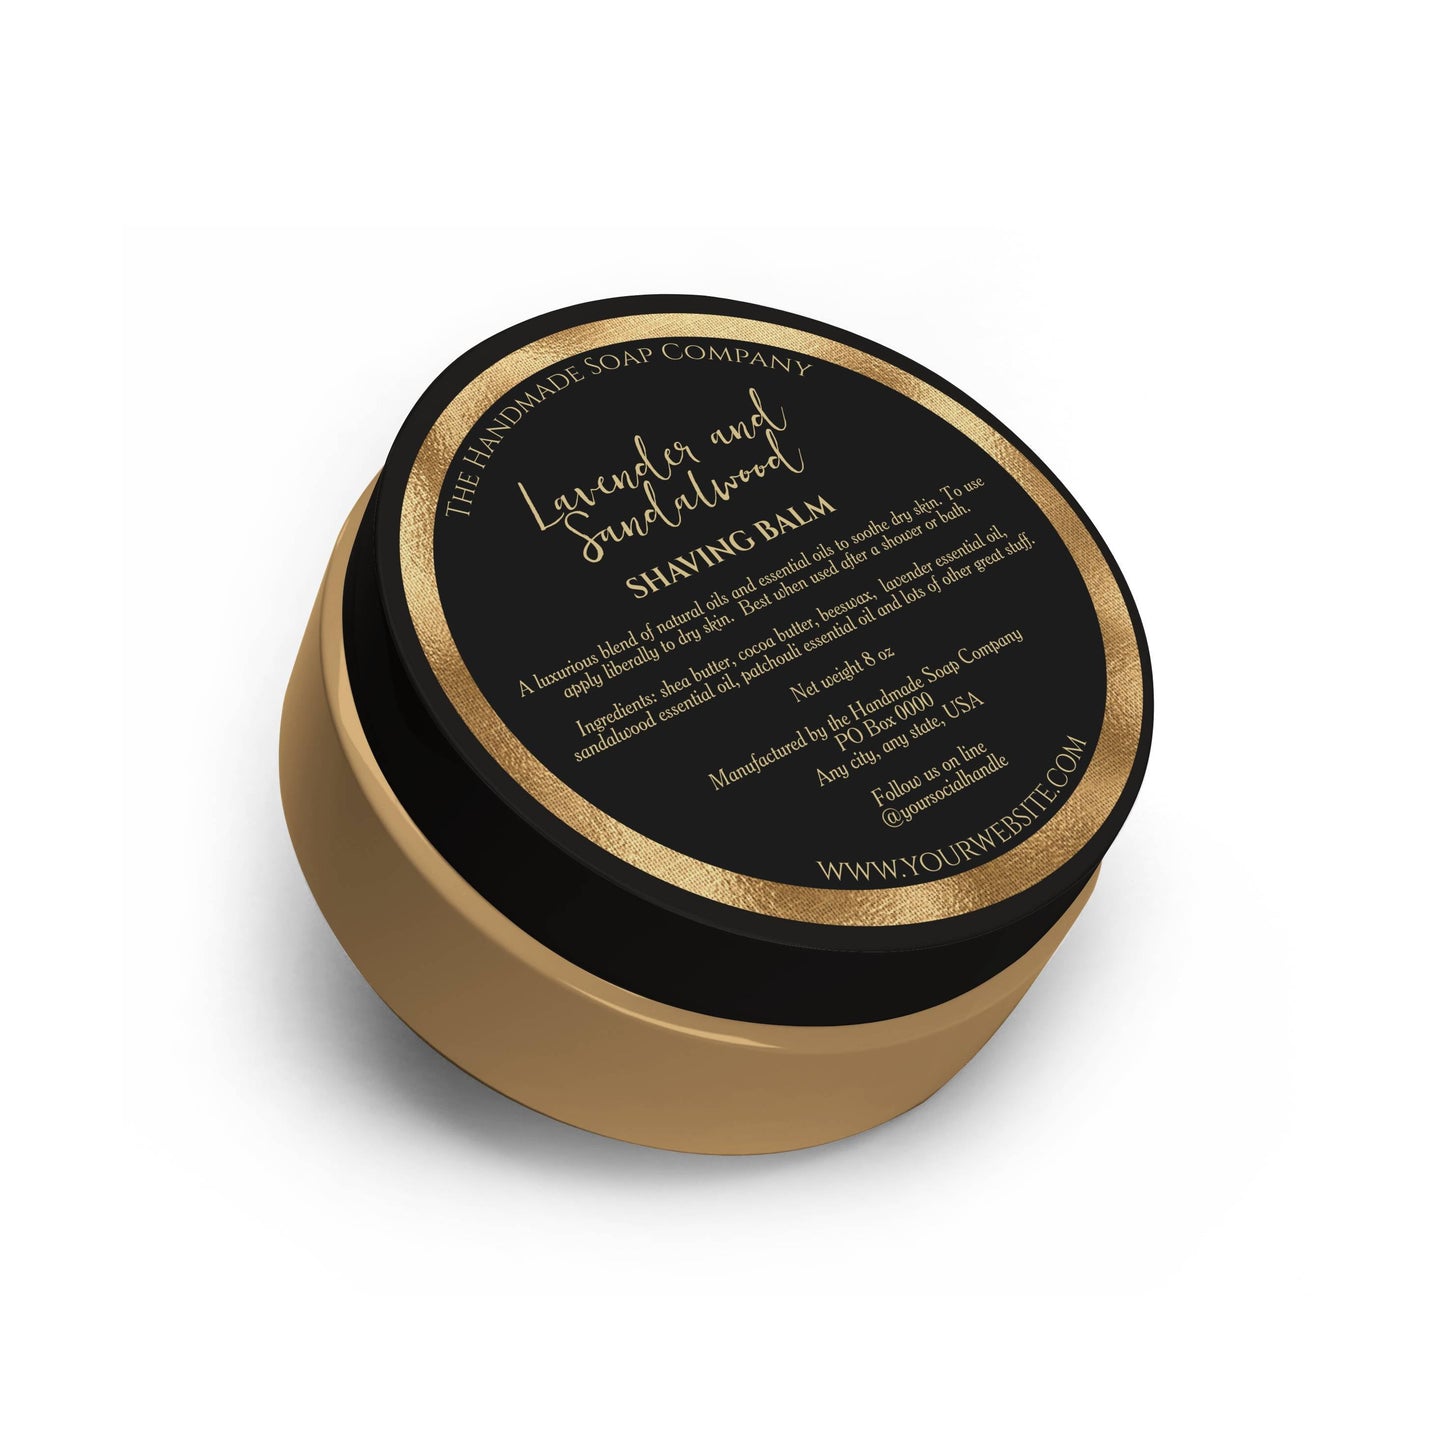 Black and Gold Cosmetics Jar Label with Ingredients